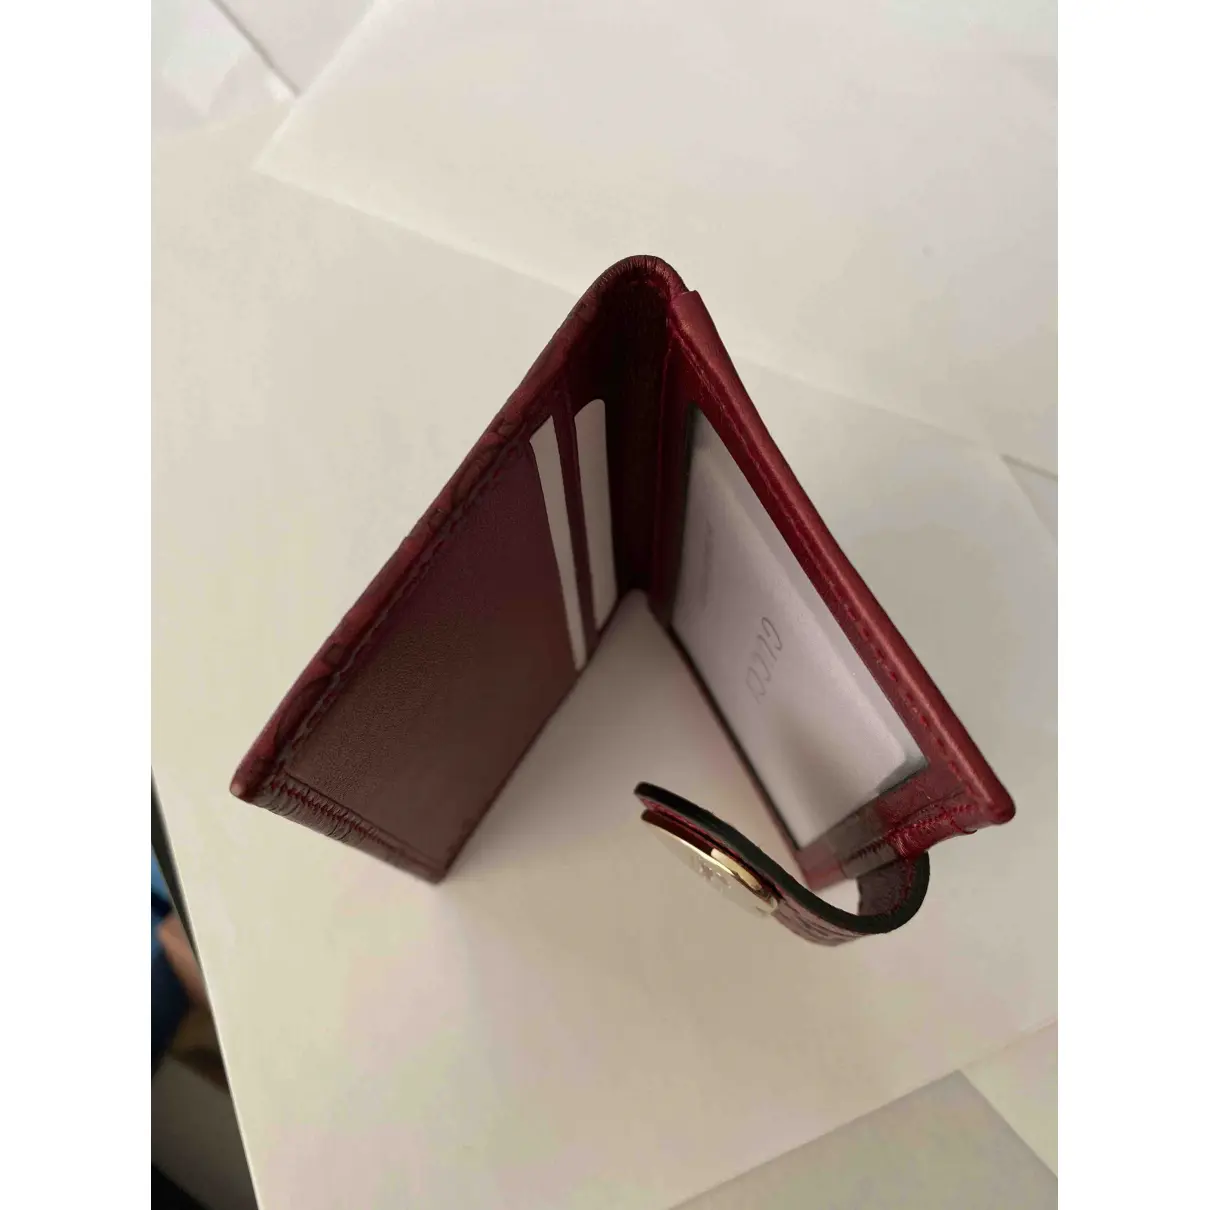 Leather card wallet Gucci